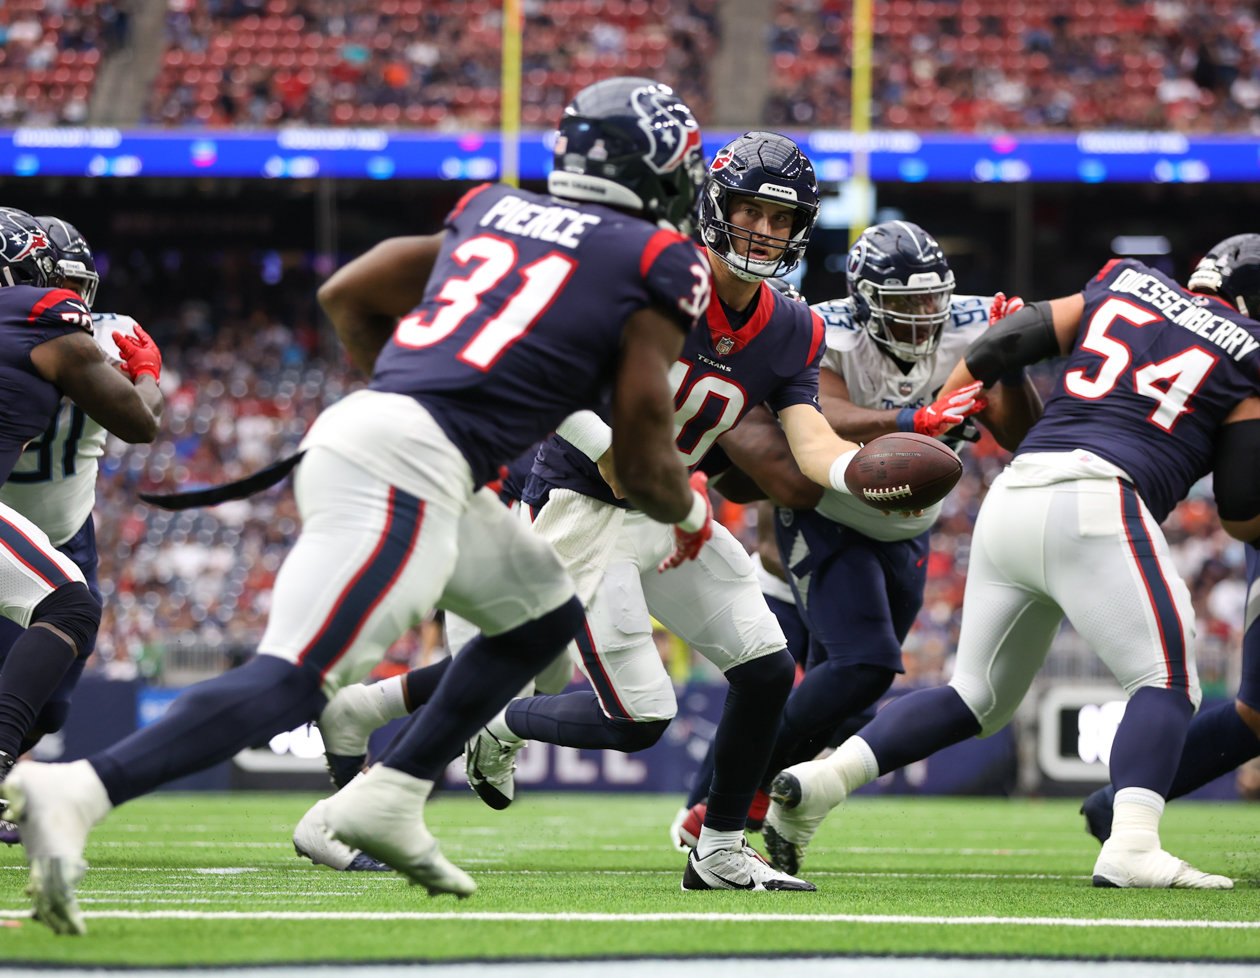 Texans quarterback Davis Mills (10) hands the ball off to running back Dameon Pierce (31) in his own end zone during an NFL game between the Texans and the Titans on Oct. 30, 2022 in Houston.